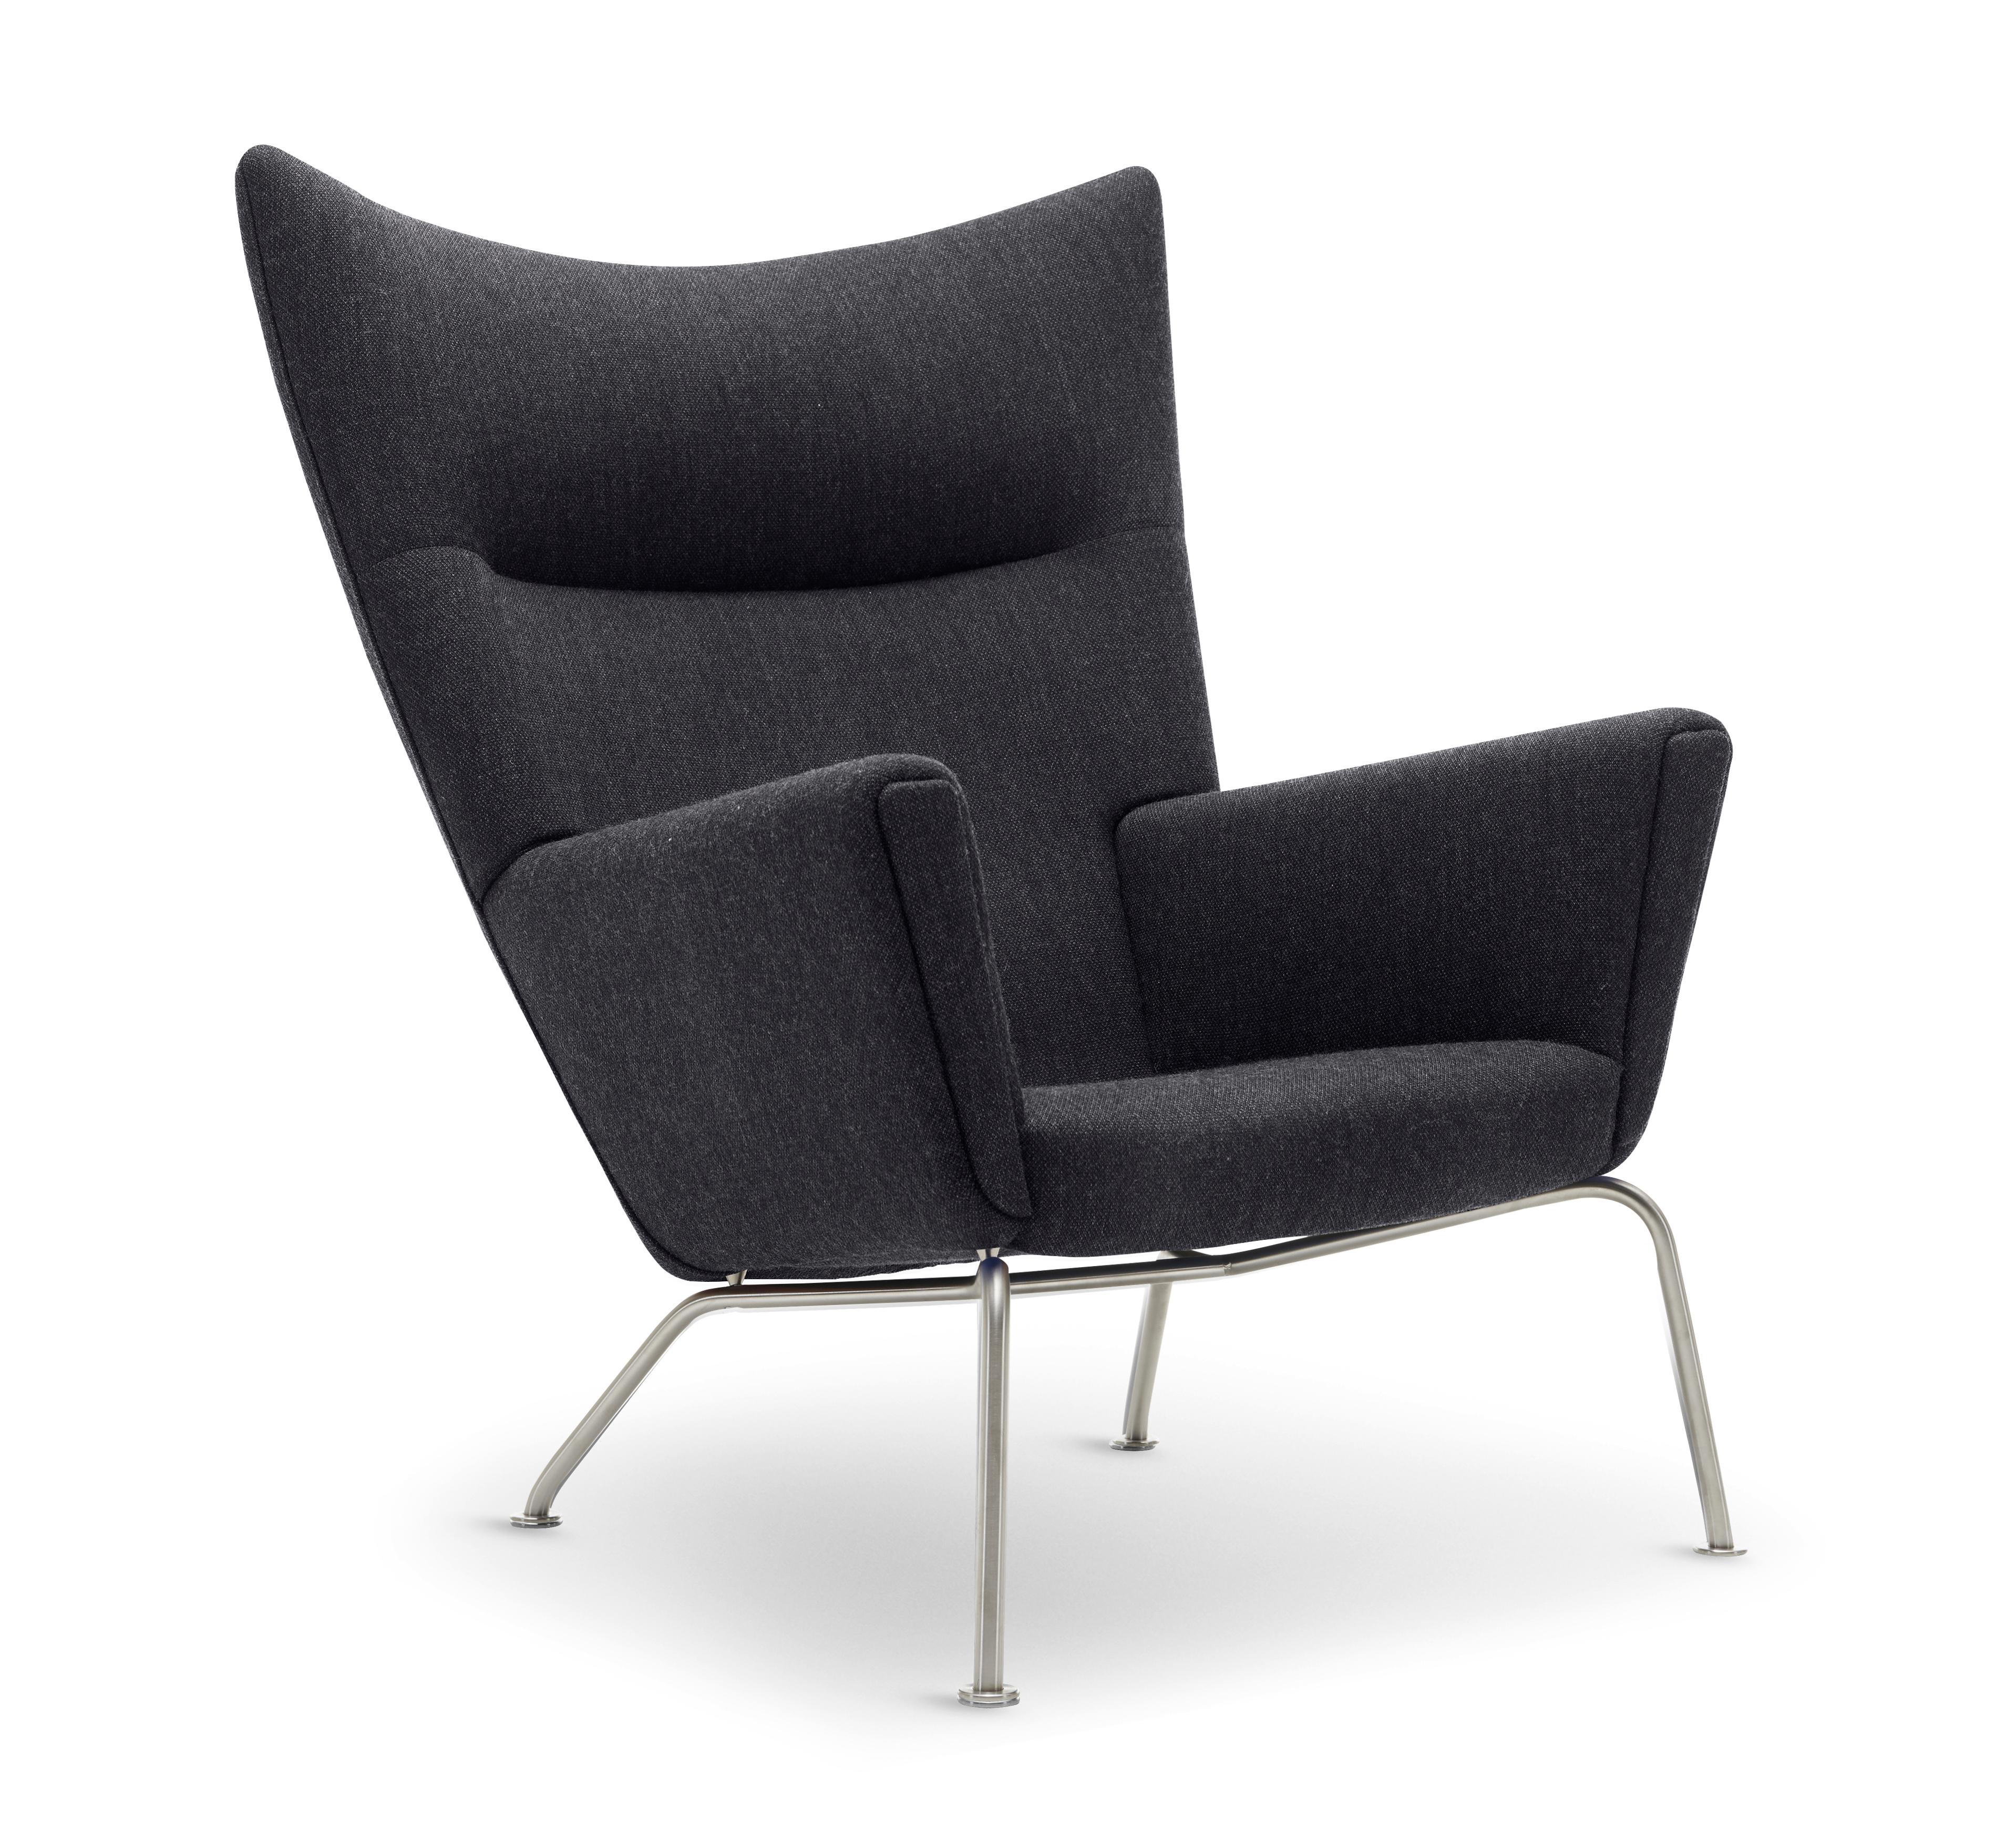 Black (Kvadrat Fiord 191) CH445 Wing Chair in Fabric with Stainless Steel Base by Hans J. Wegner 2